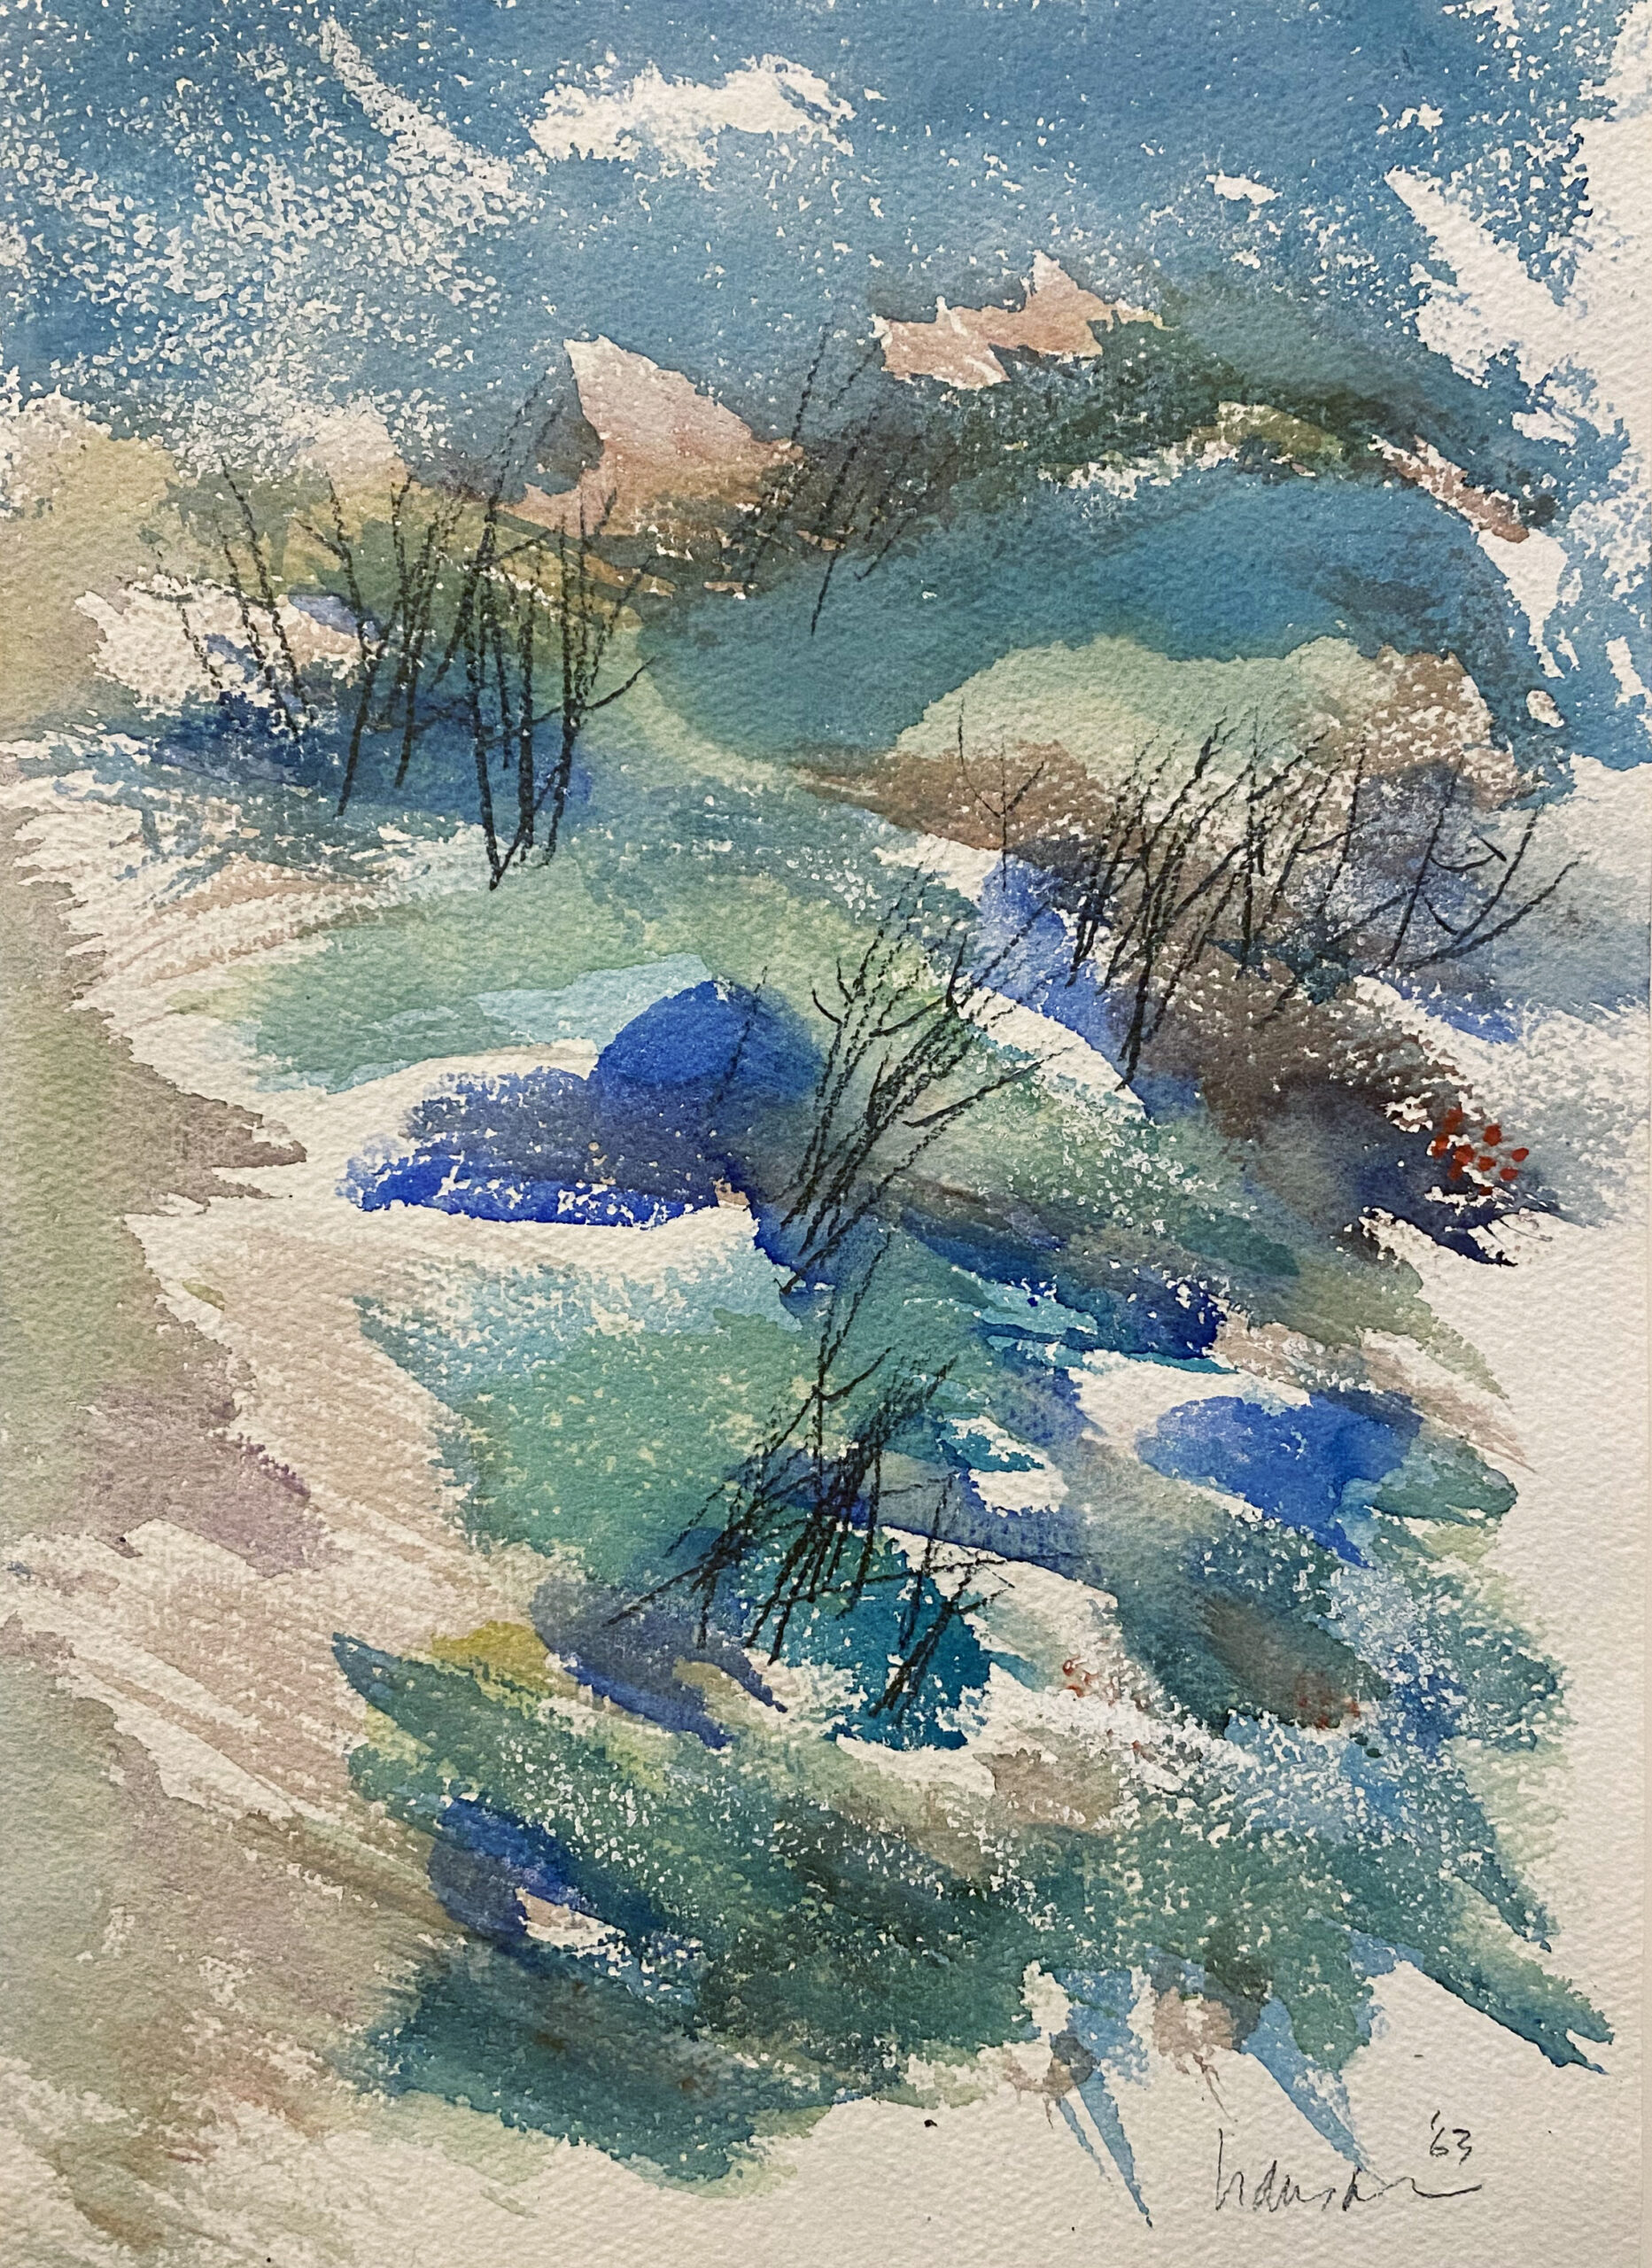 William P. Hanson (American, 1928–2017), Grasses, Branches, and Shore, Maine, 1963/1969, watercolor, pencil, and crayon, 14 x 10 inches. Gift of Professor Cortland Eyer, 88.7, AS B056